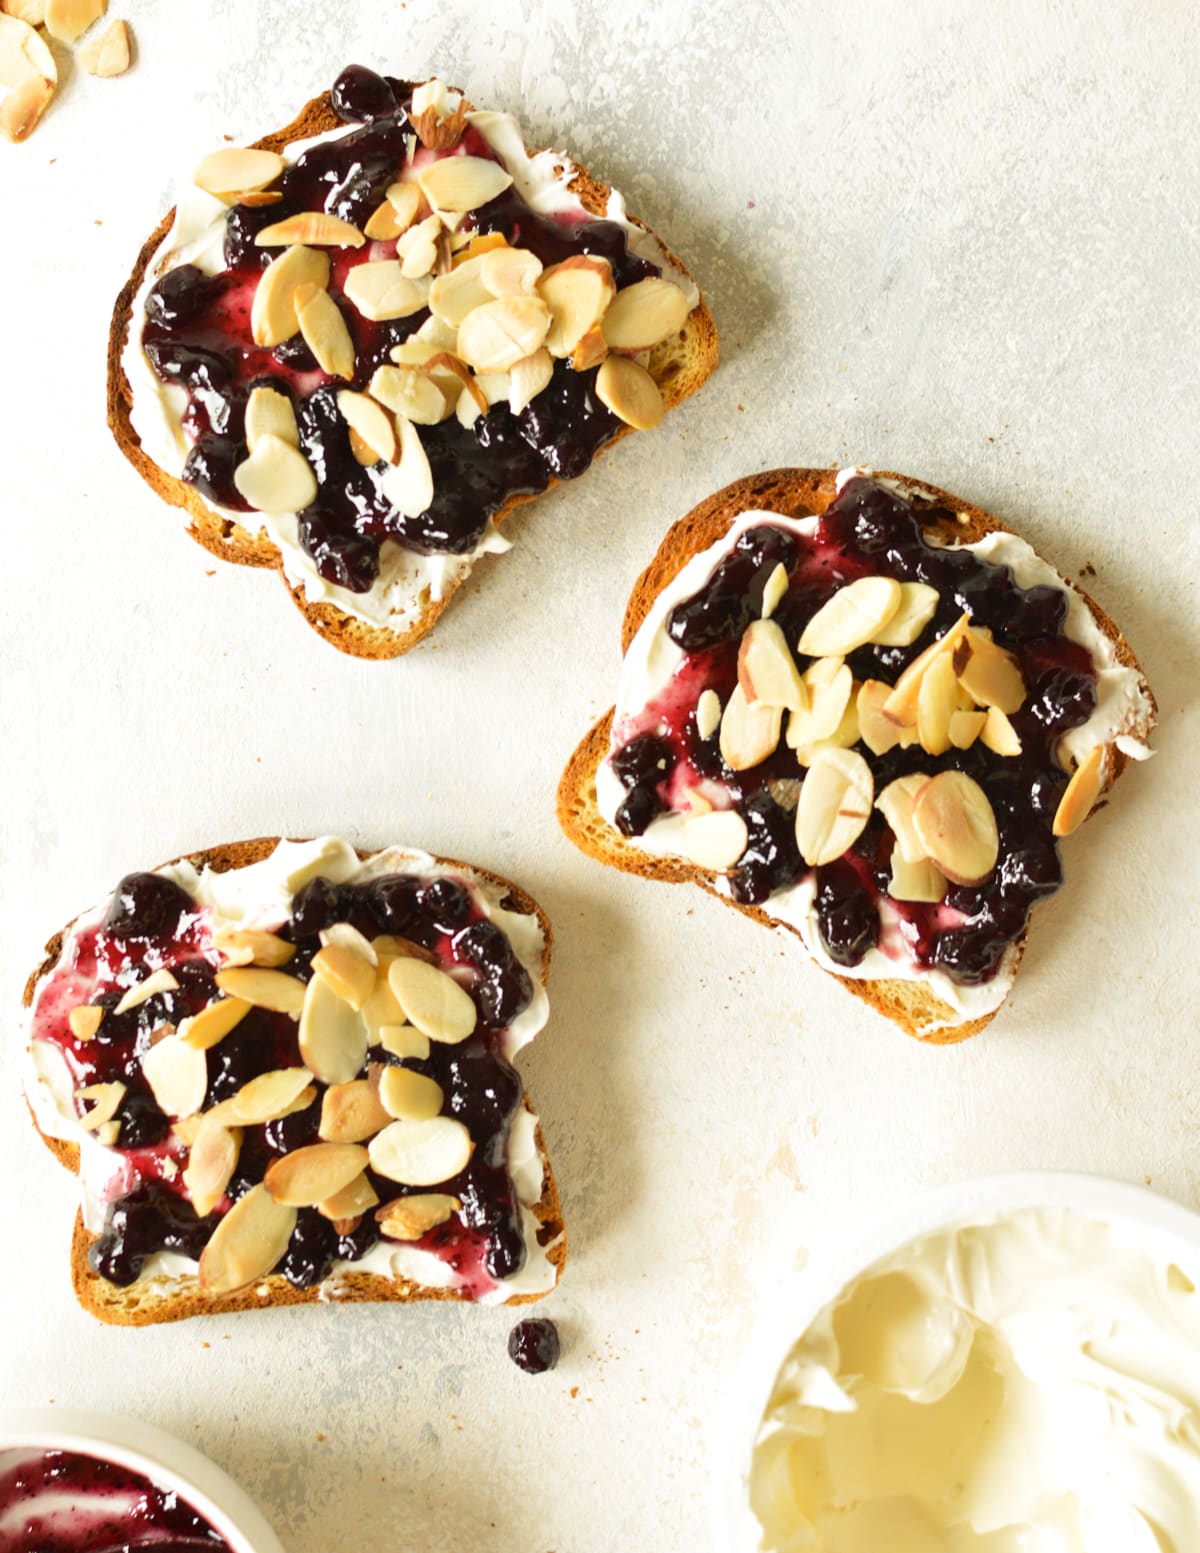 cream cheese, blueberry jam, and almonds on toast